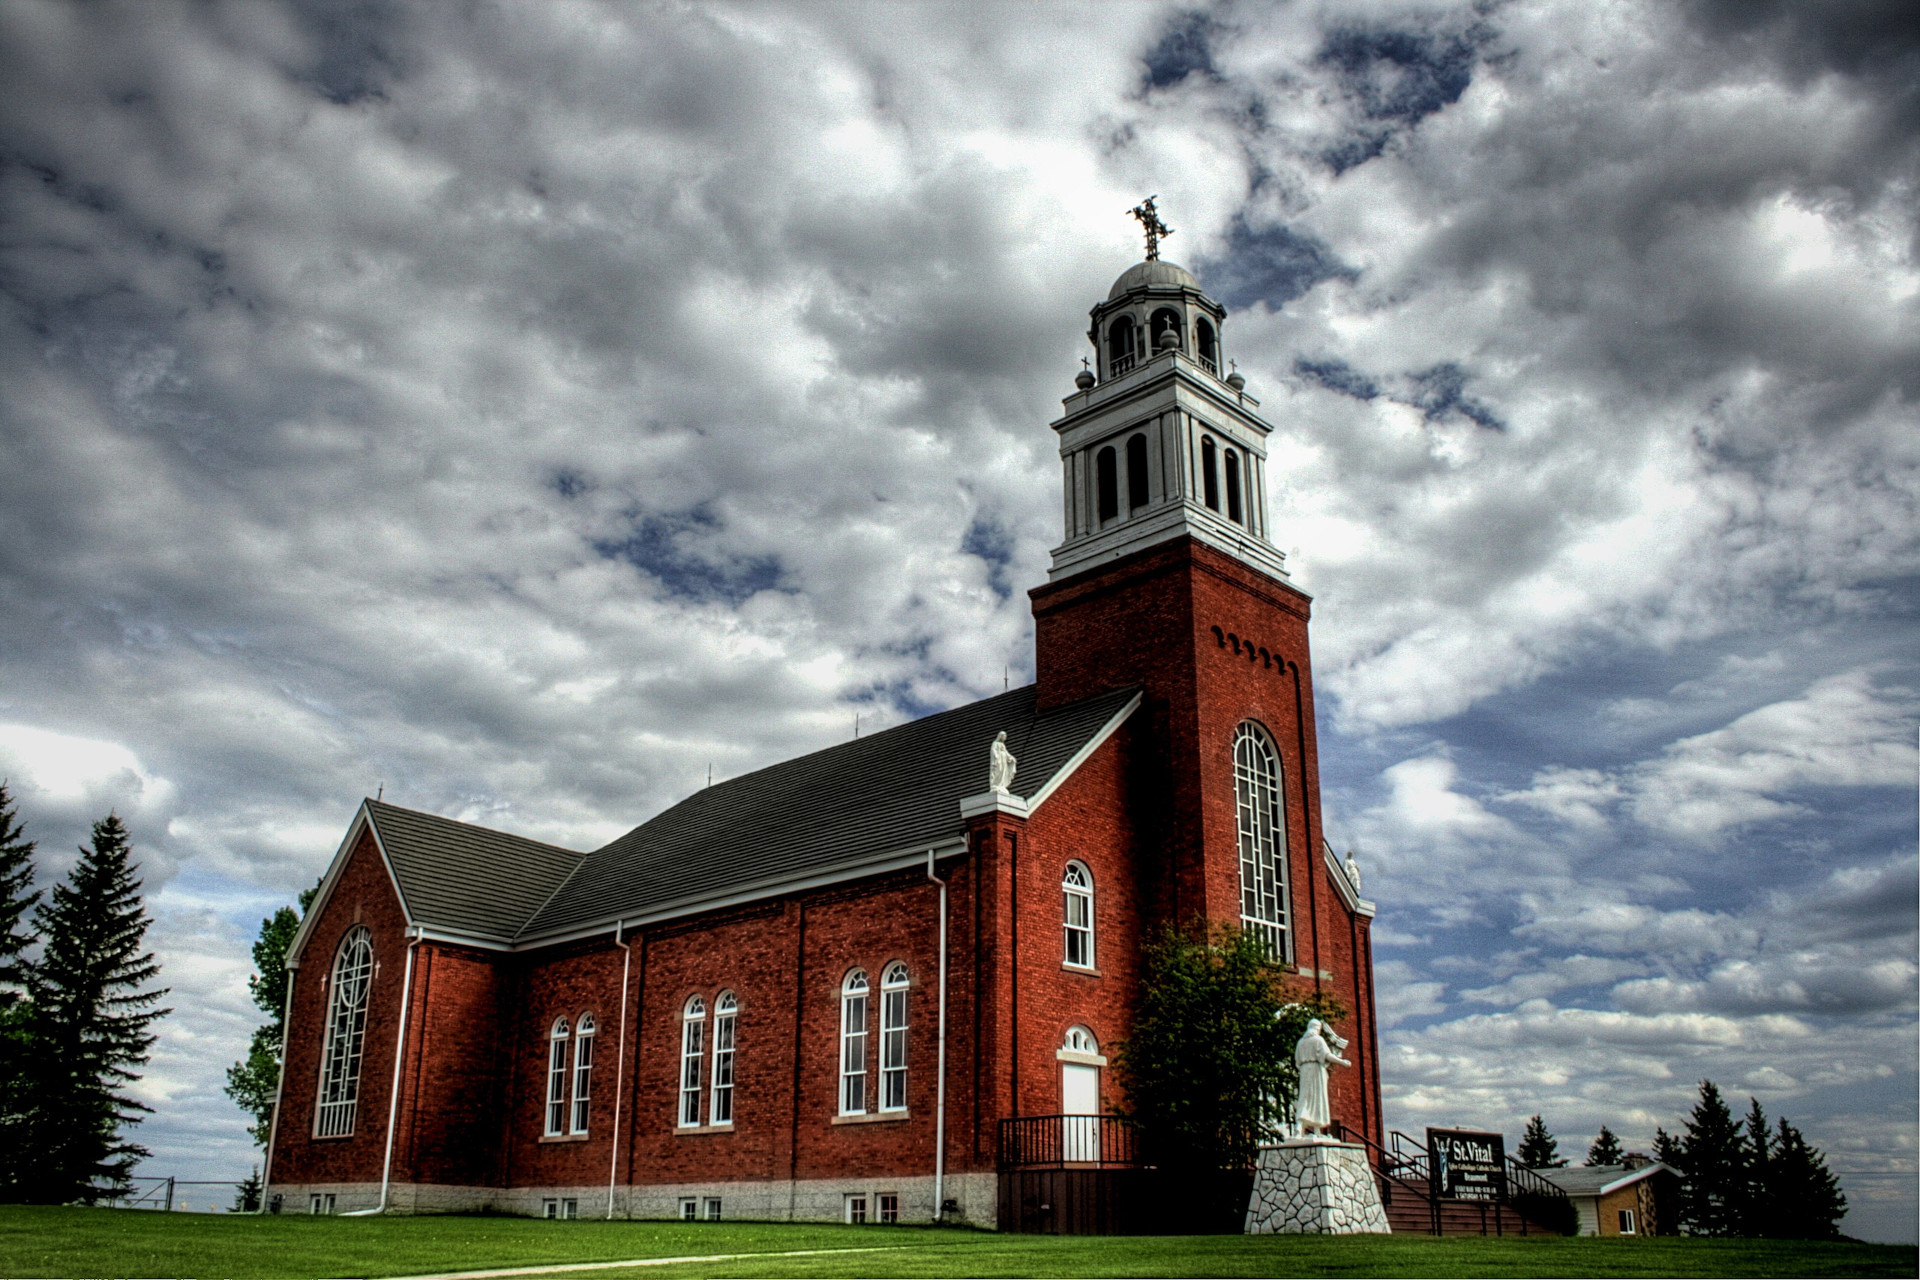 Long shot of Saint Vital Roman catholic church, in Beaumont, against the sky filled with clouds.